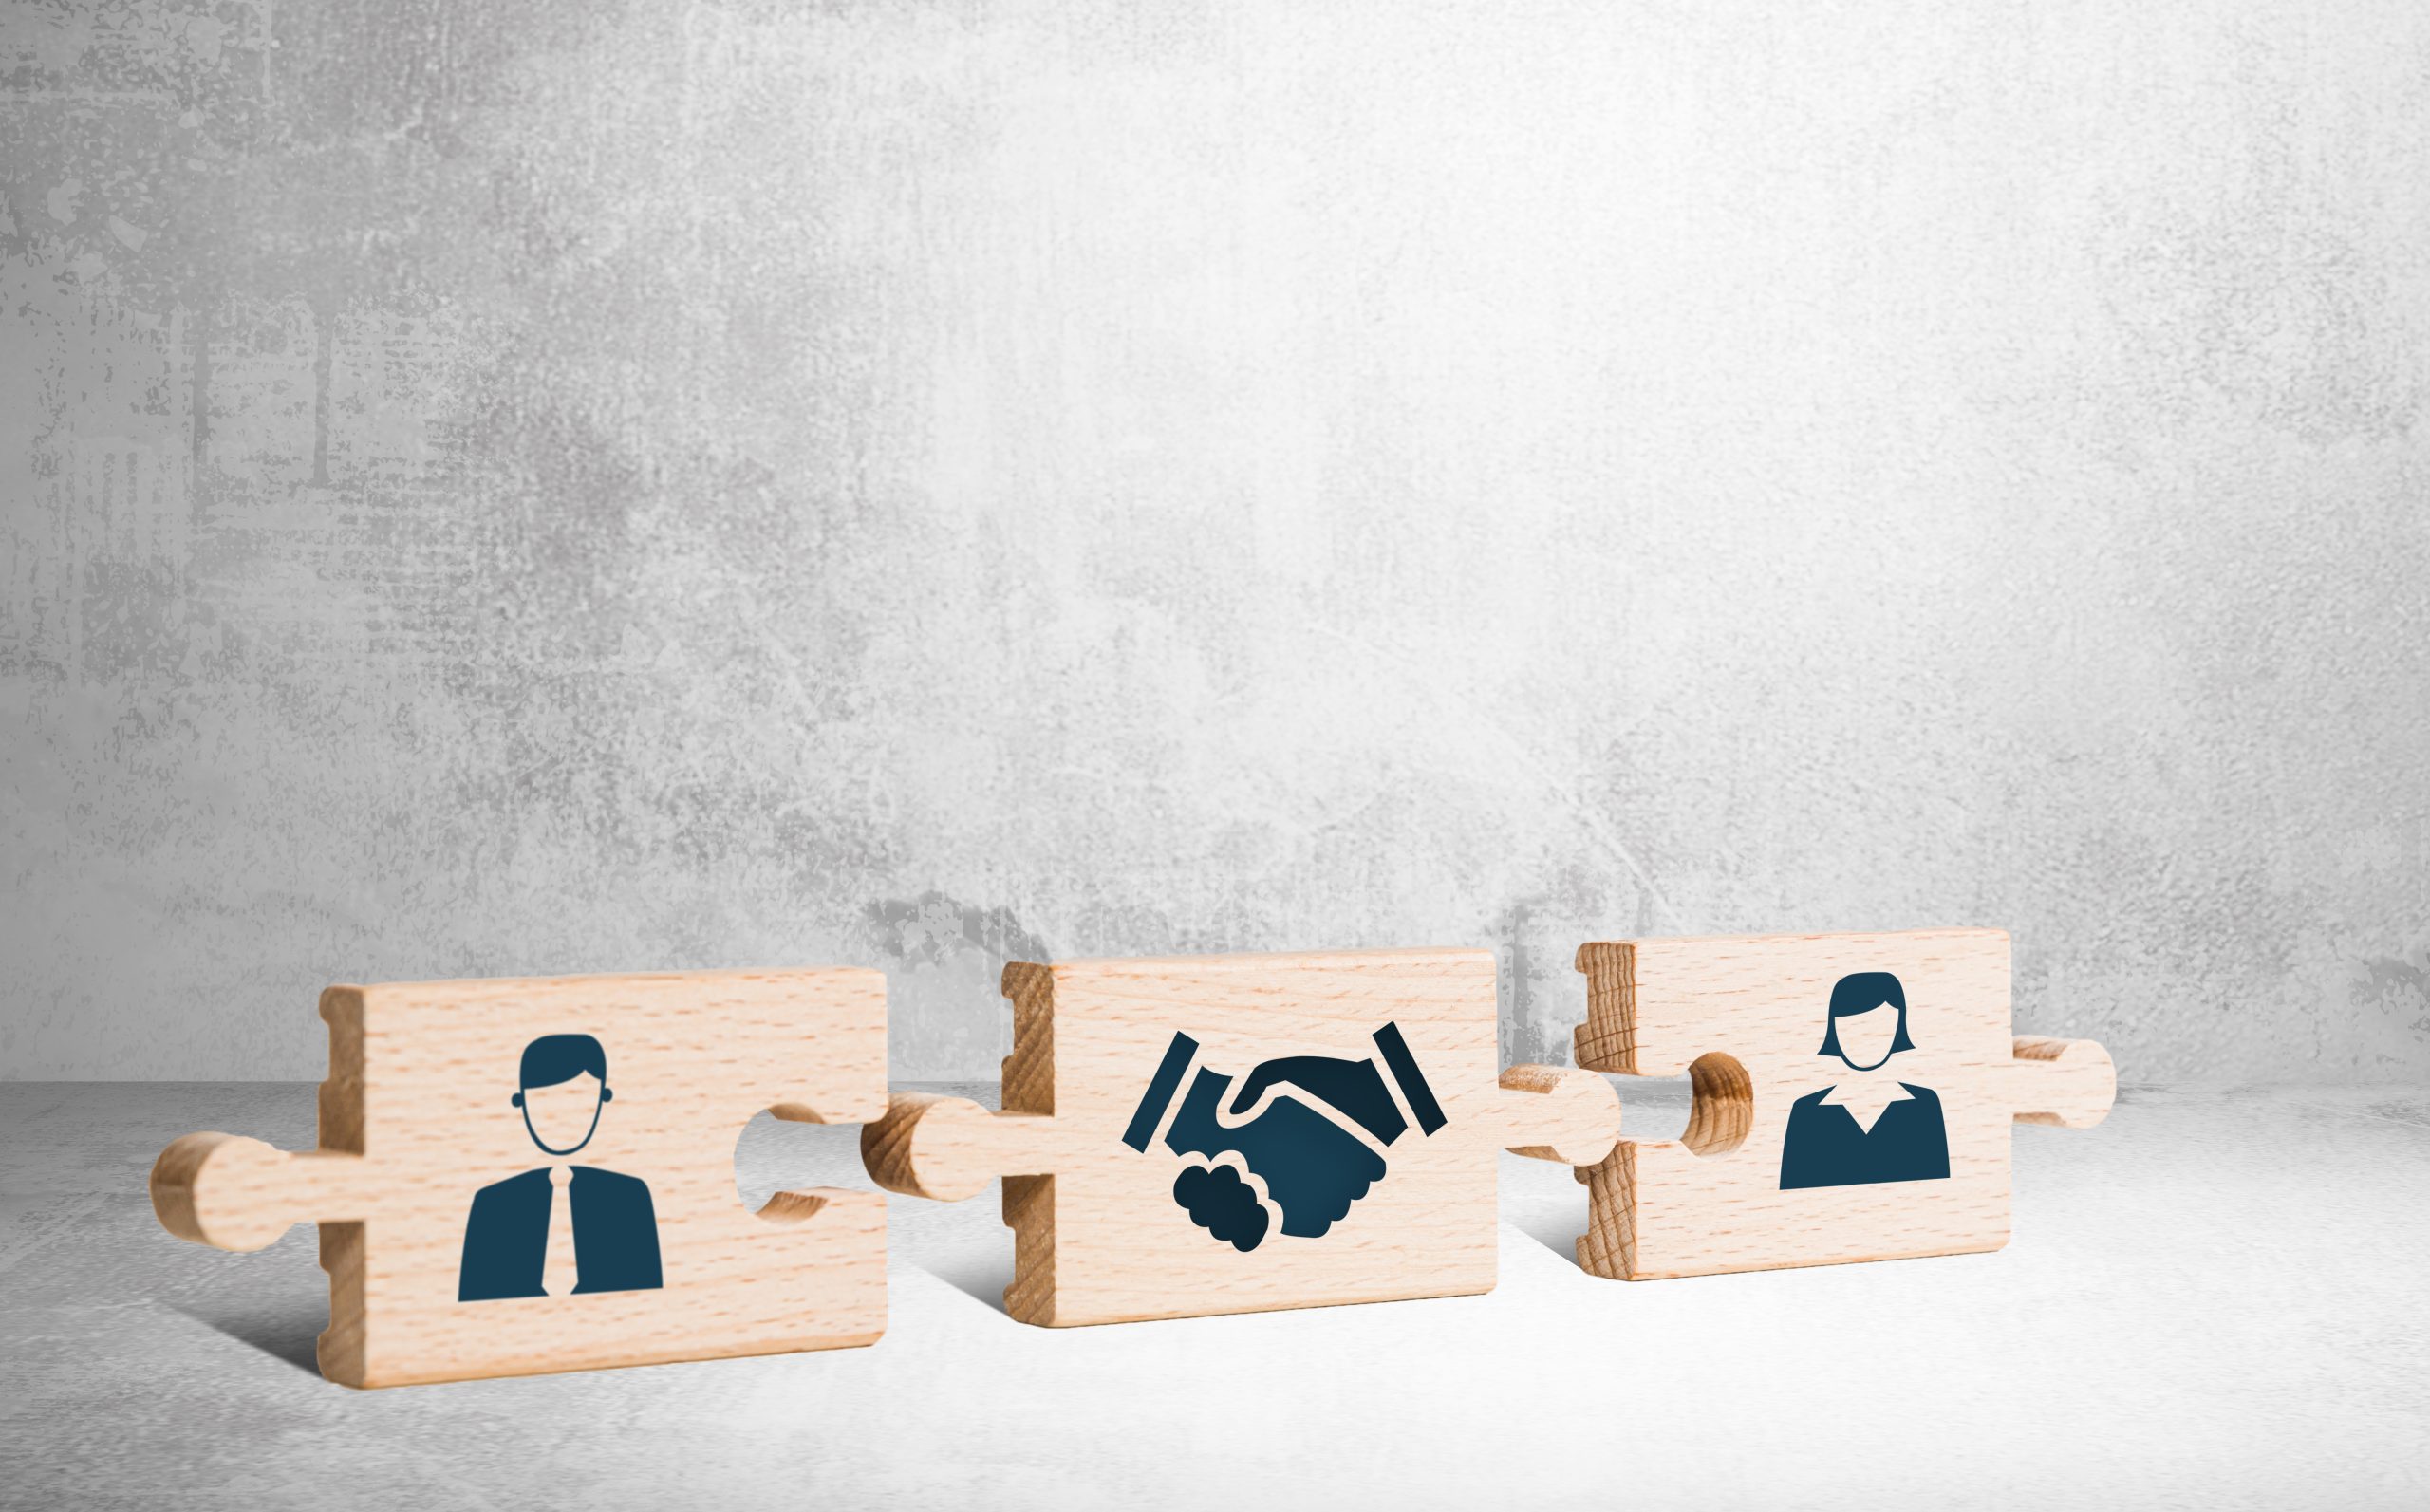 three puzzle pieces on gray background: man, woman, and shaking hands. Represents complexities of guardianship for severe mental illness, with alternatives like supported decision-making